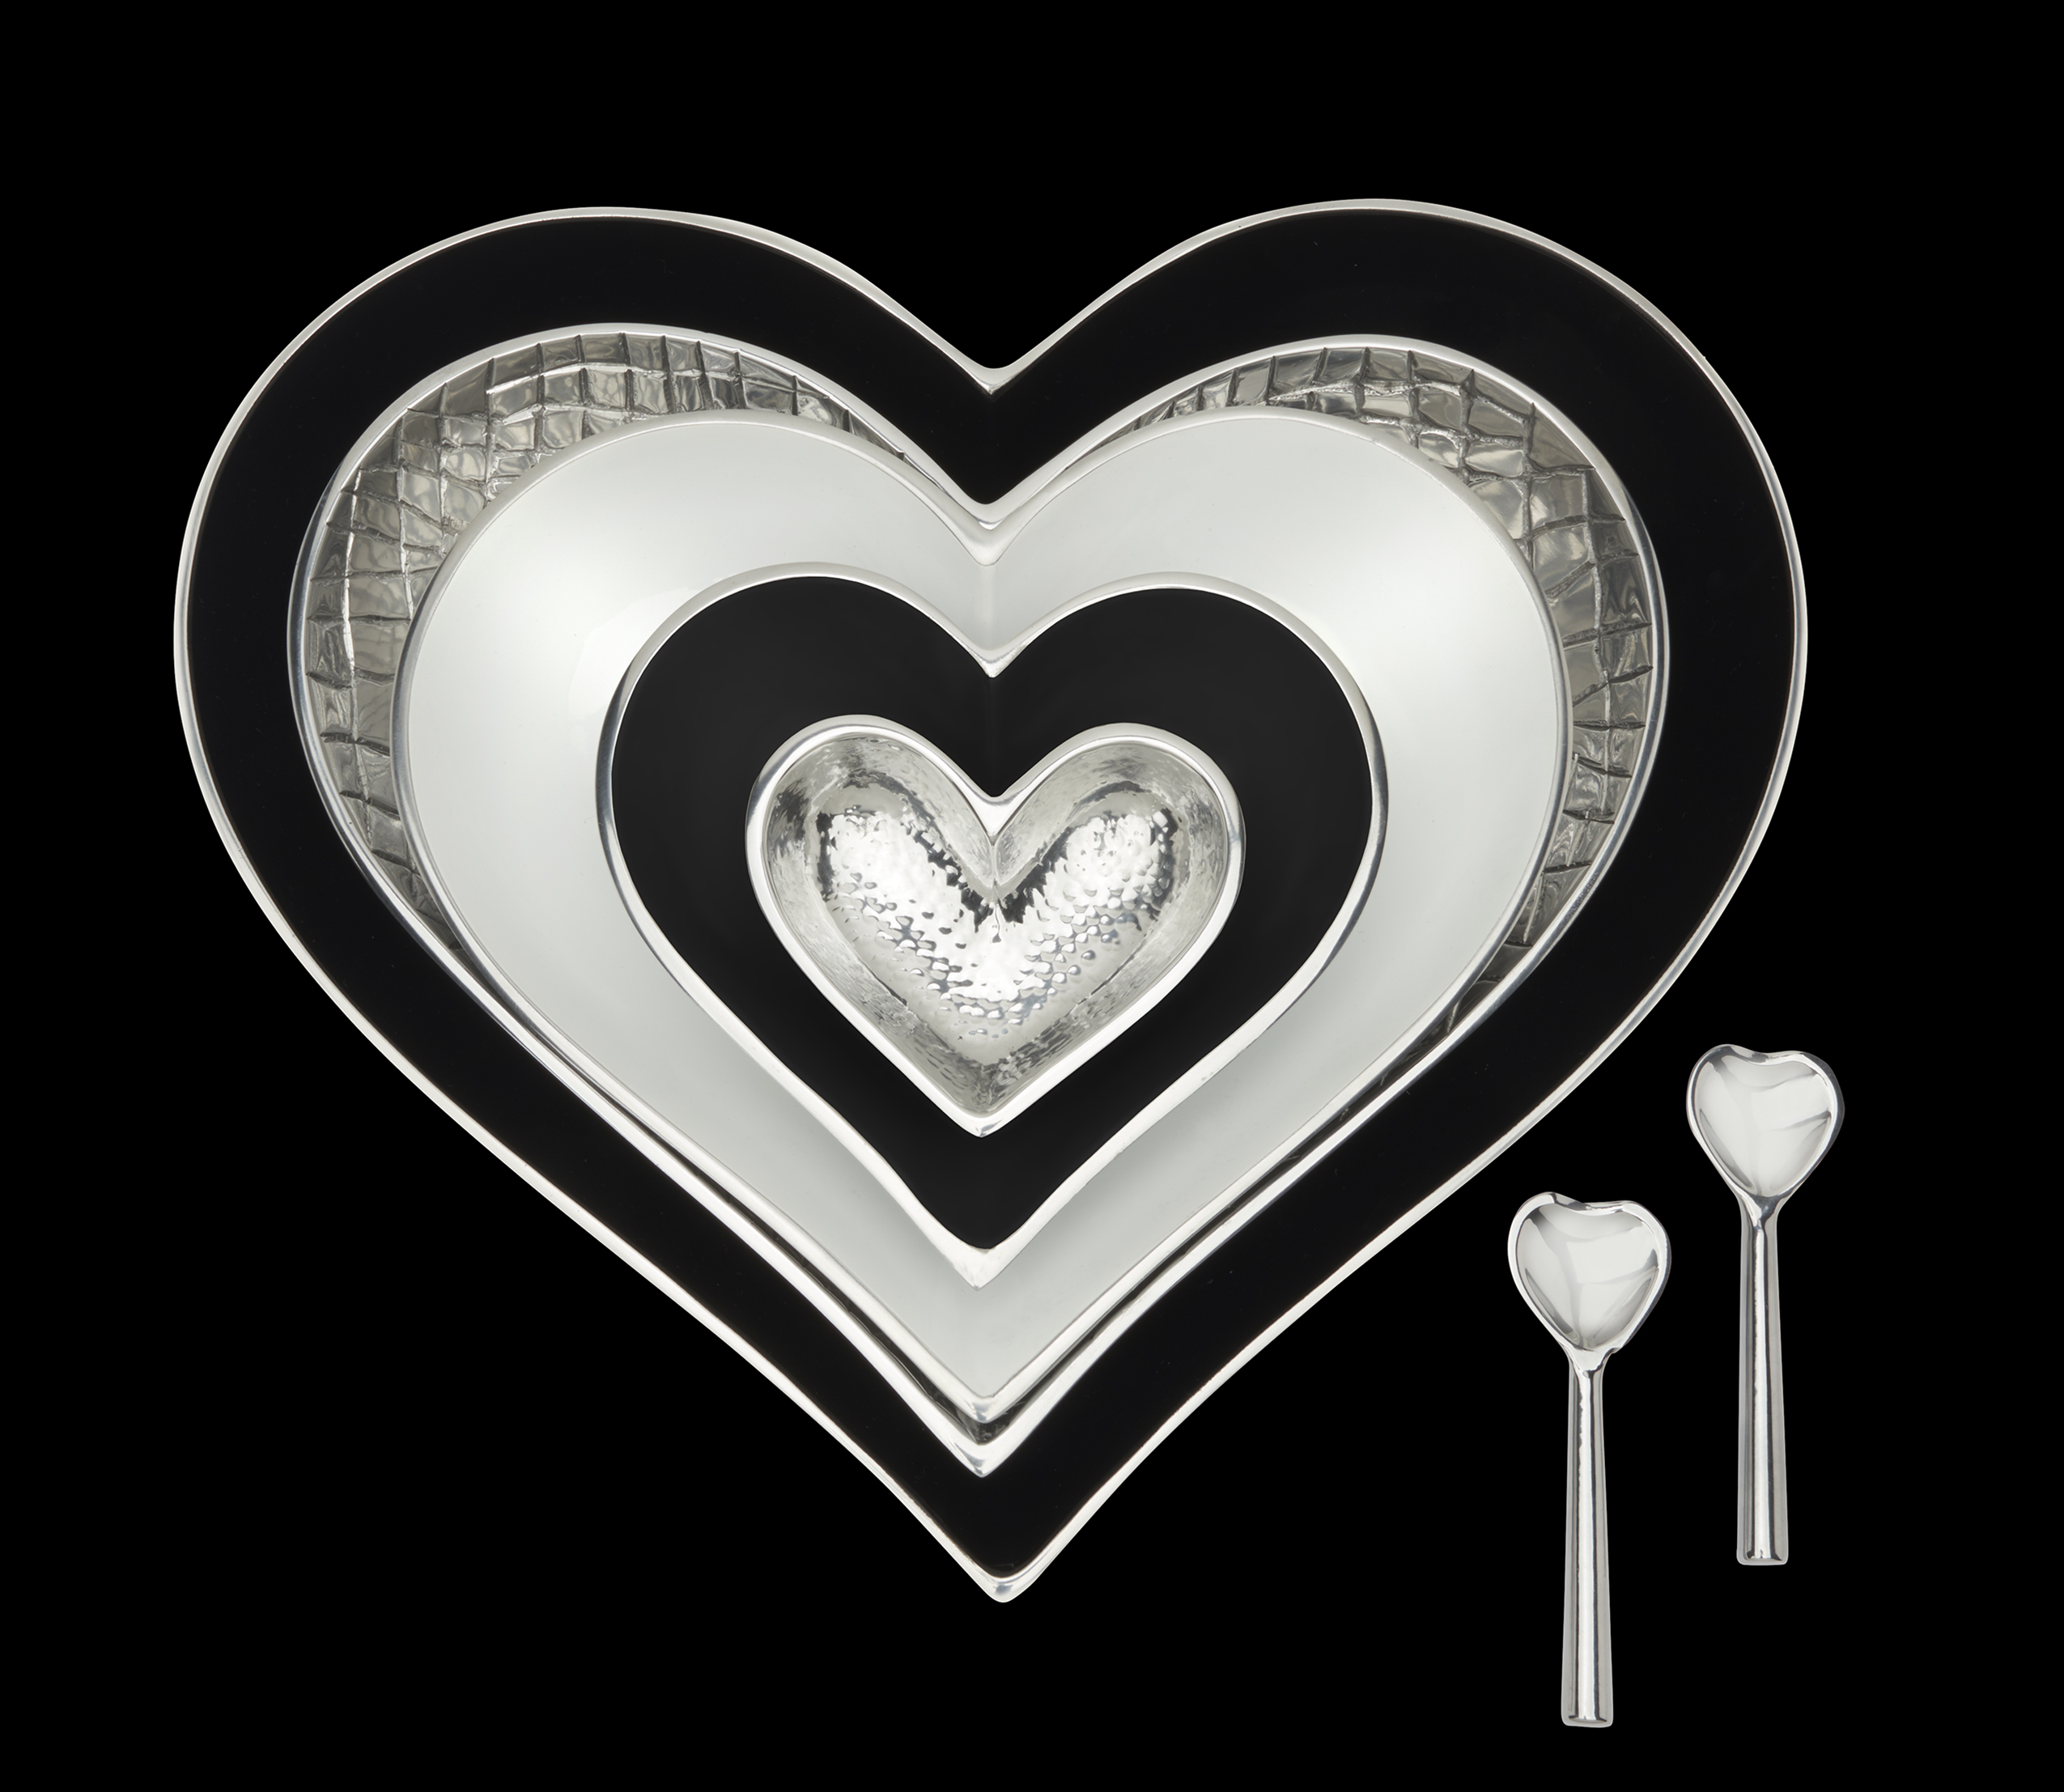 5 Hearts Bowl Set with 2 Heart Spoons-Black & White